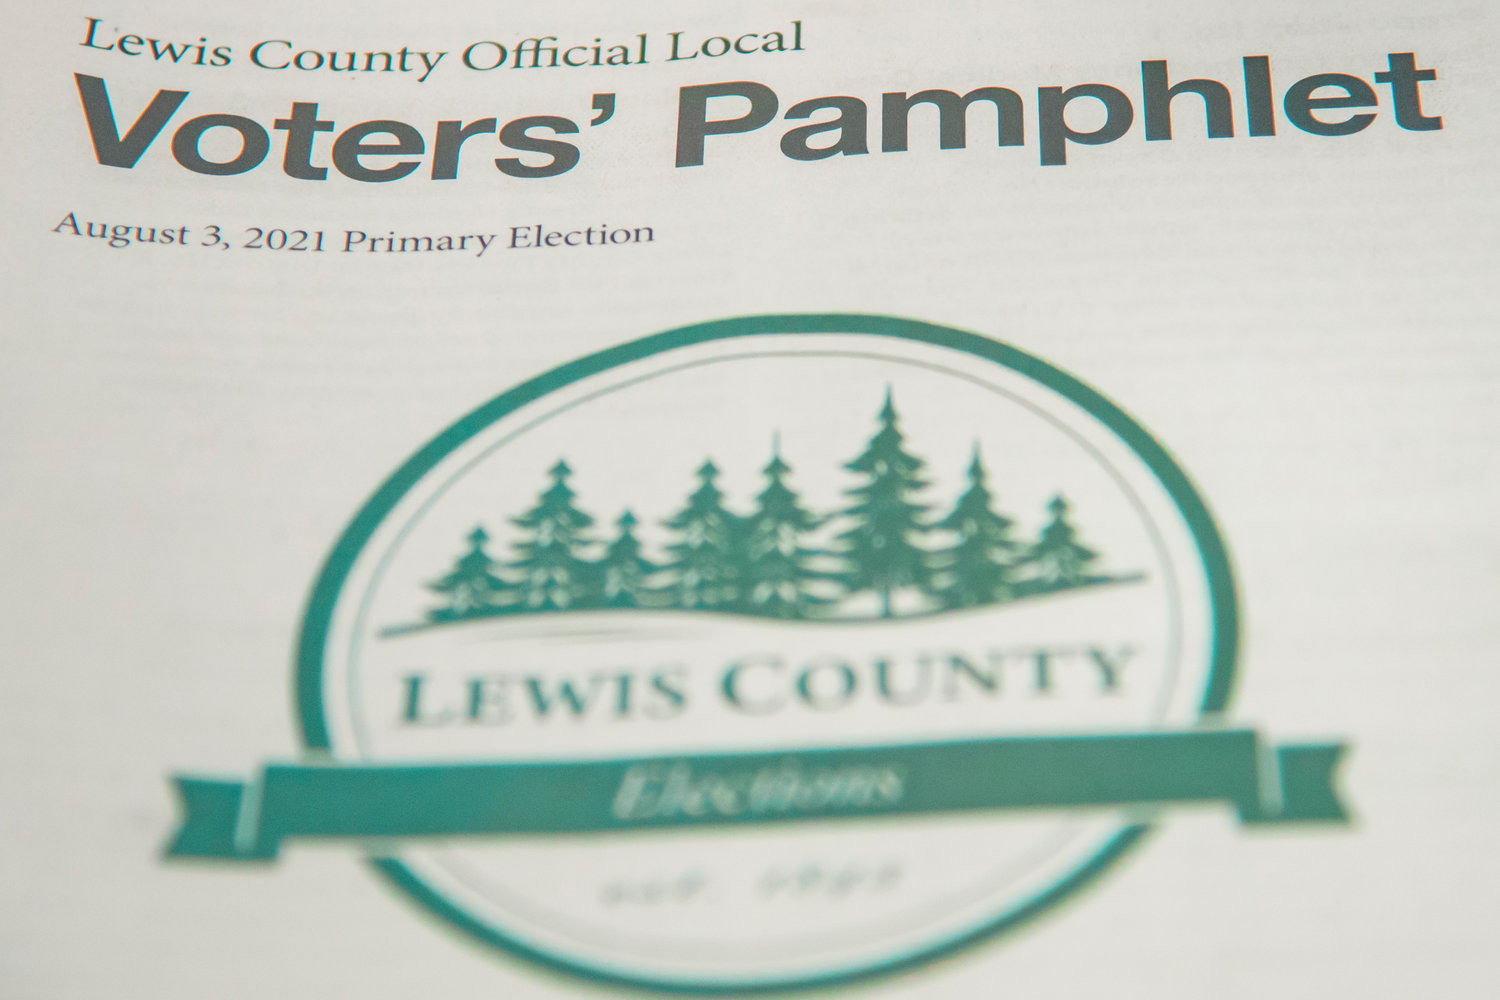 A Lewis County Official Local Voters' Pamphlet sits on display in the Lewis County Courthouse in Chehalis.